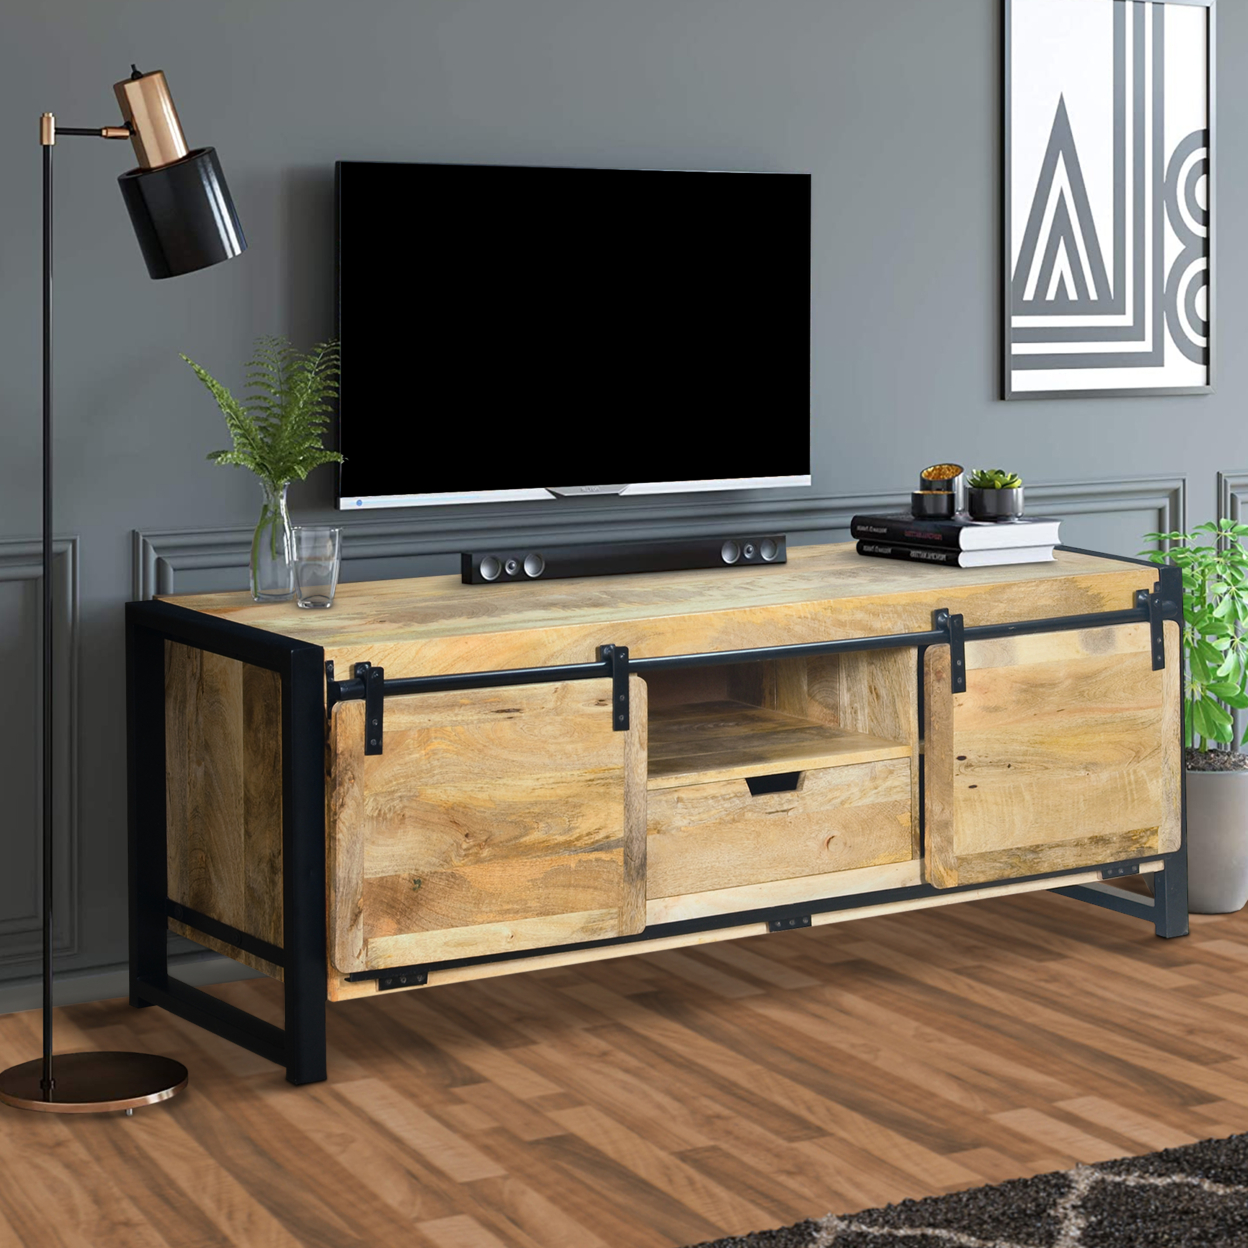 63 Inch Wooden Industrial TV Cabinet with Barn Style Sliding Doors, Brown and Black, Saltoro Sherpi